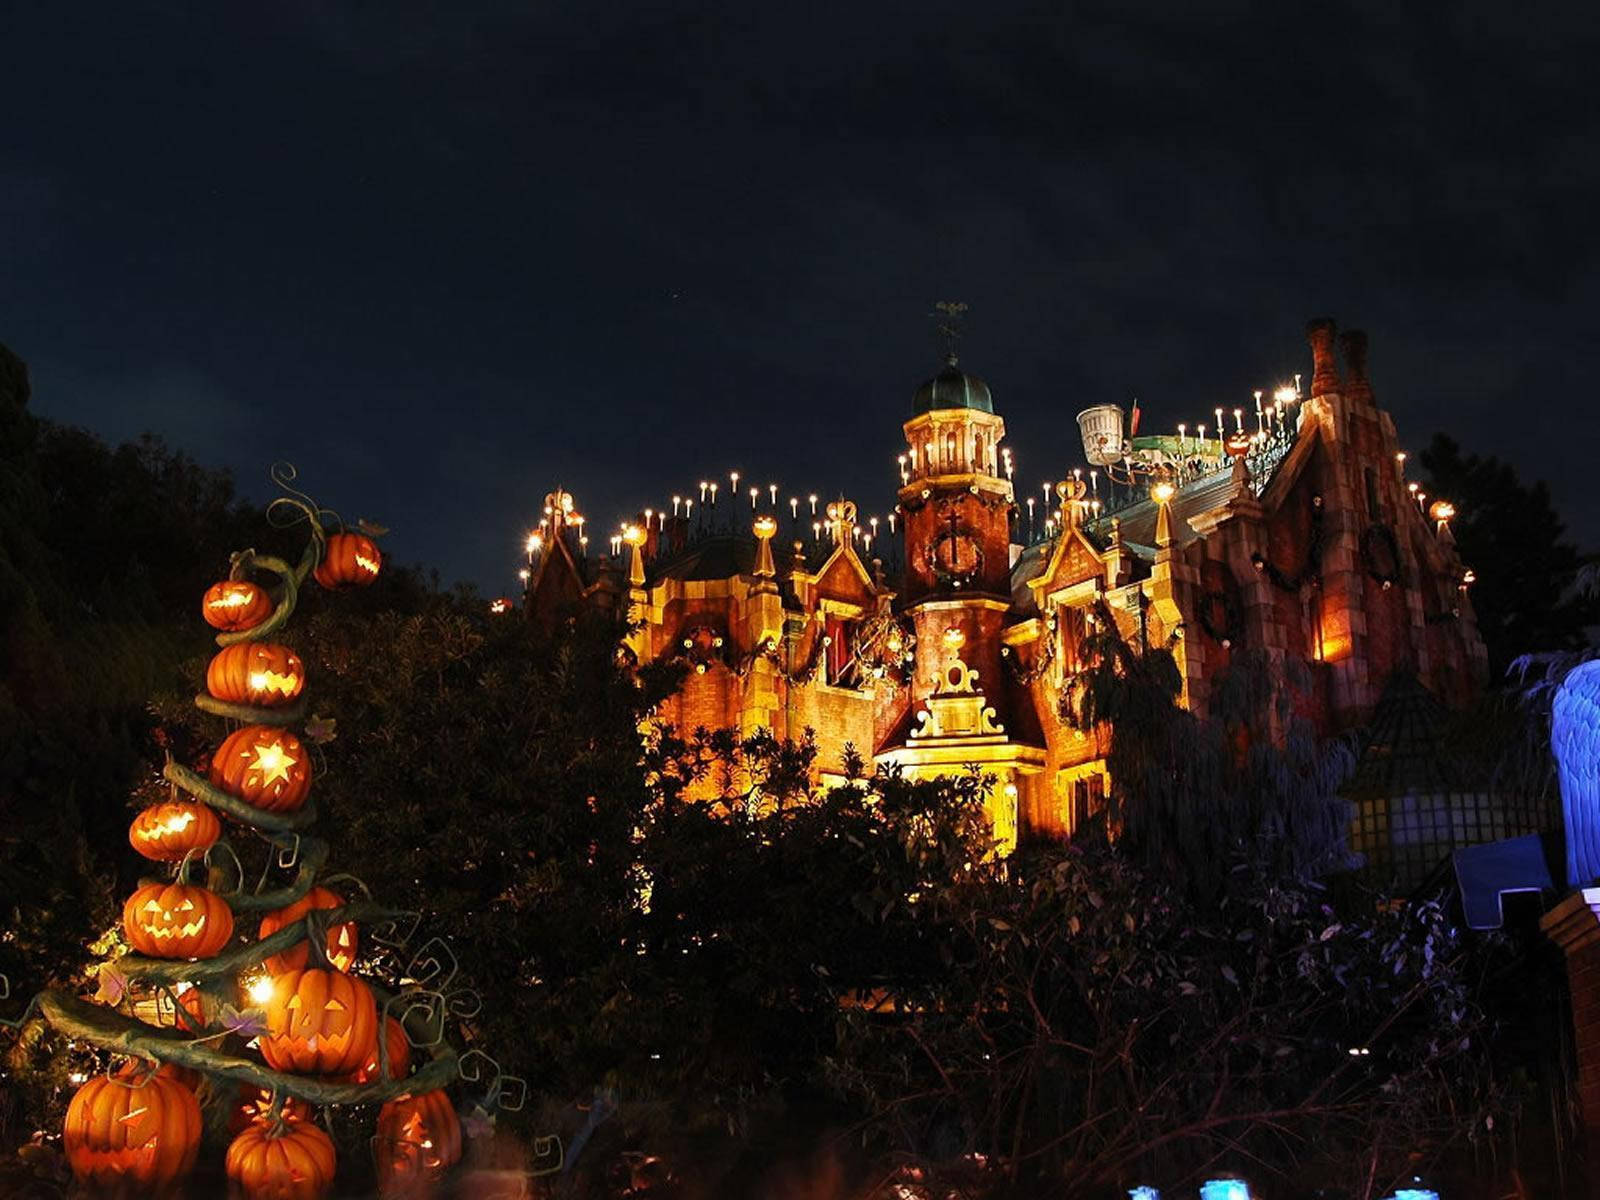 "A mysterious haunted house for Halloween" Wallpaper